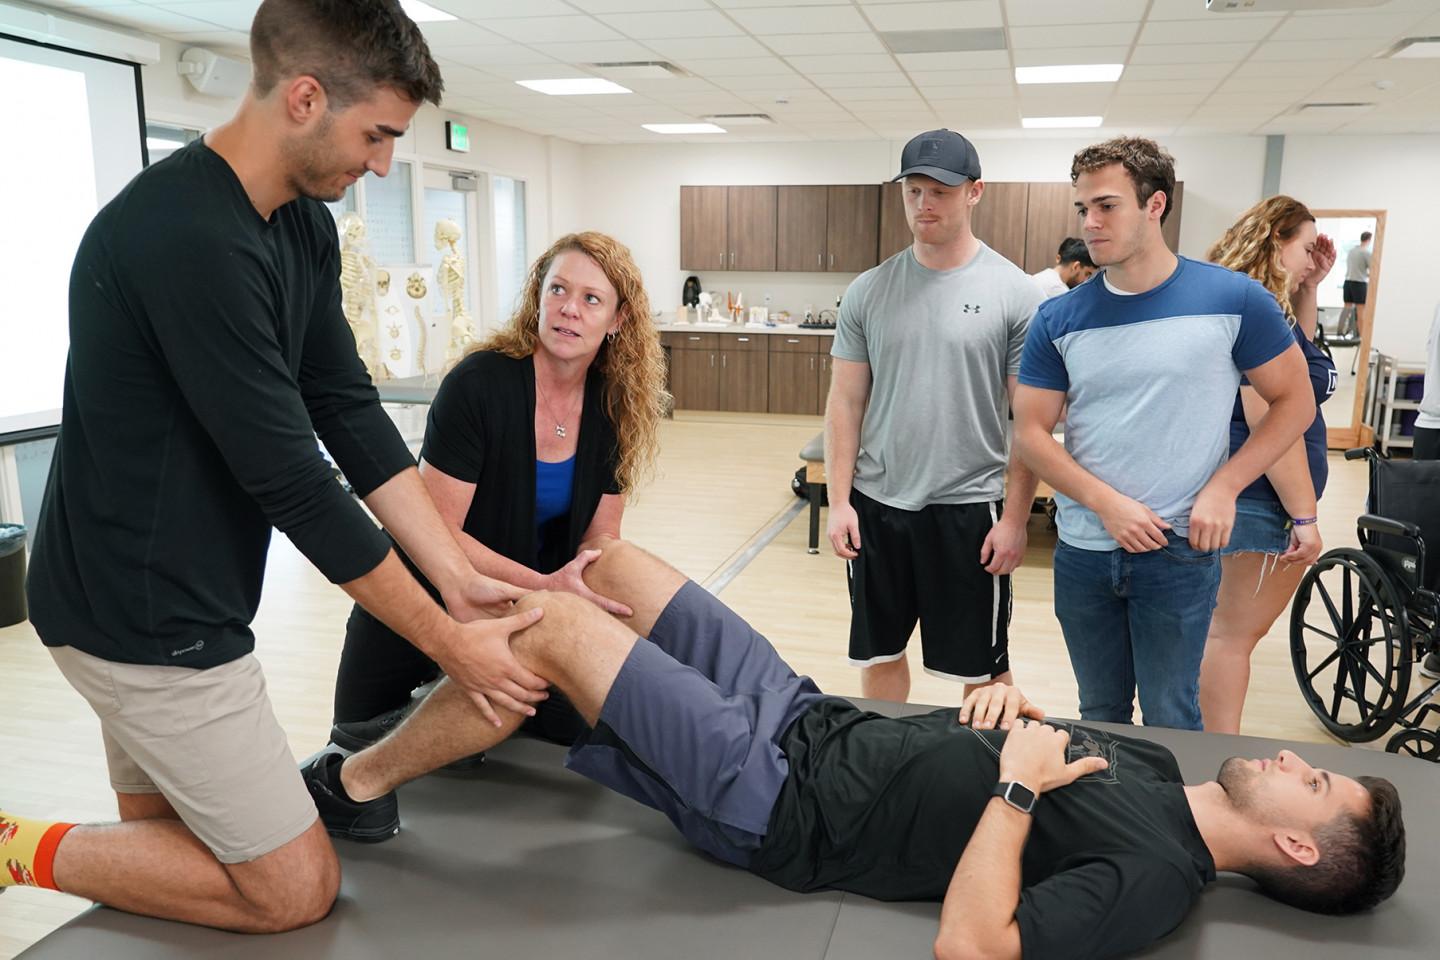 Doctor of Physical Therapy students complete hands-on learning with a patient.